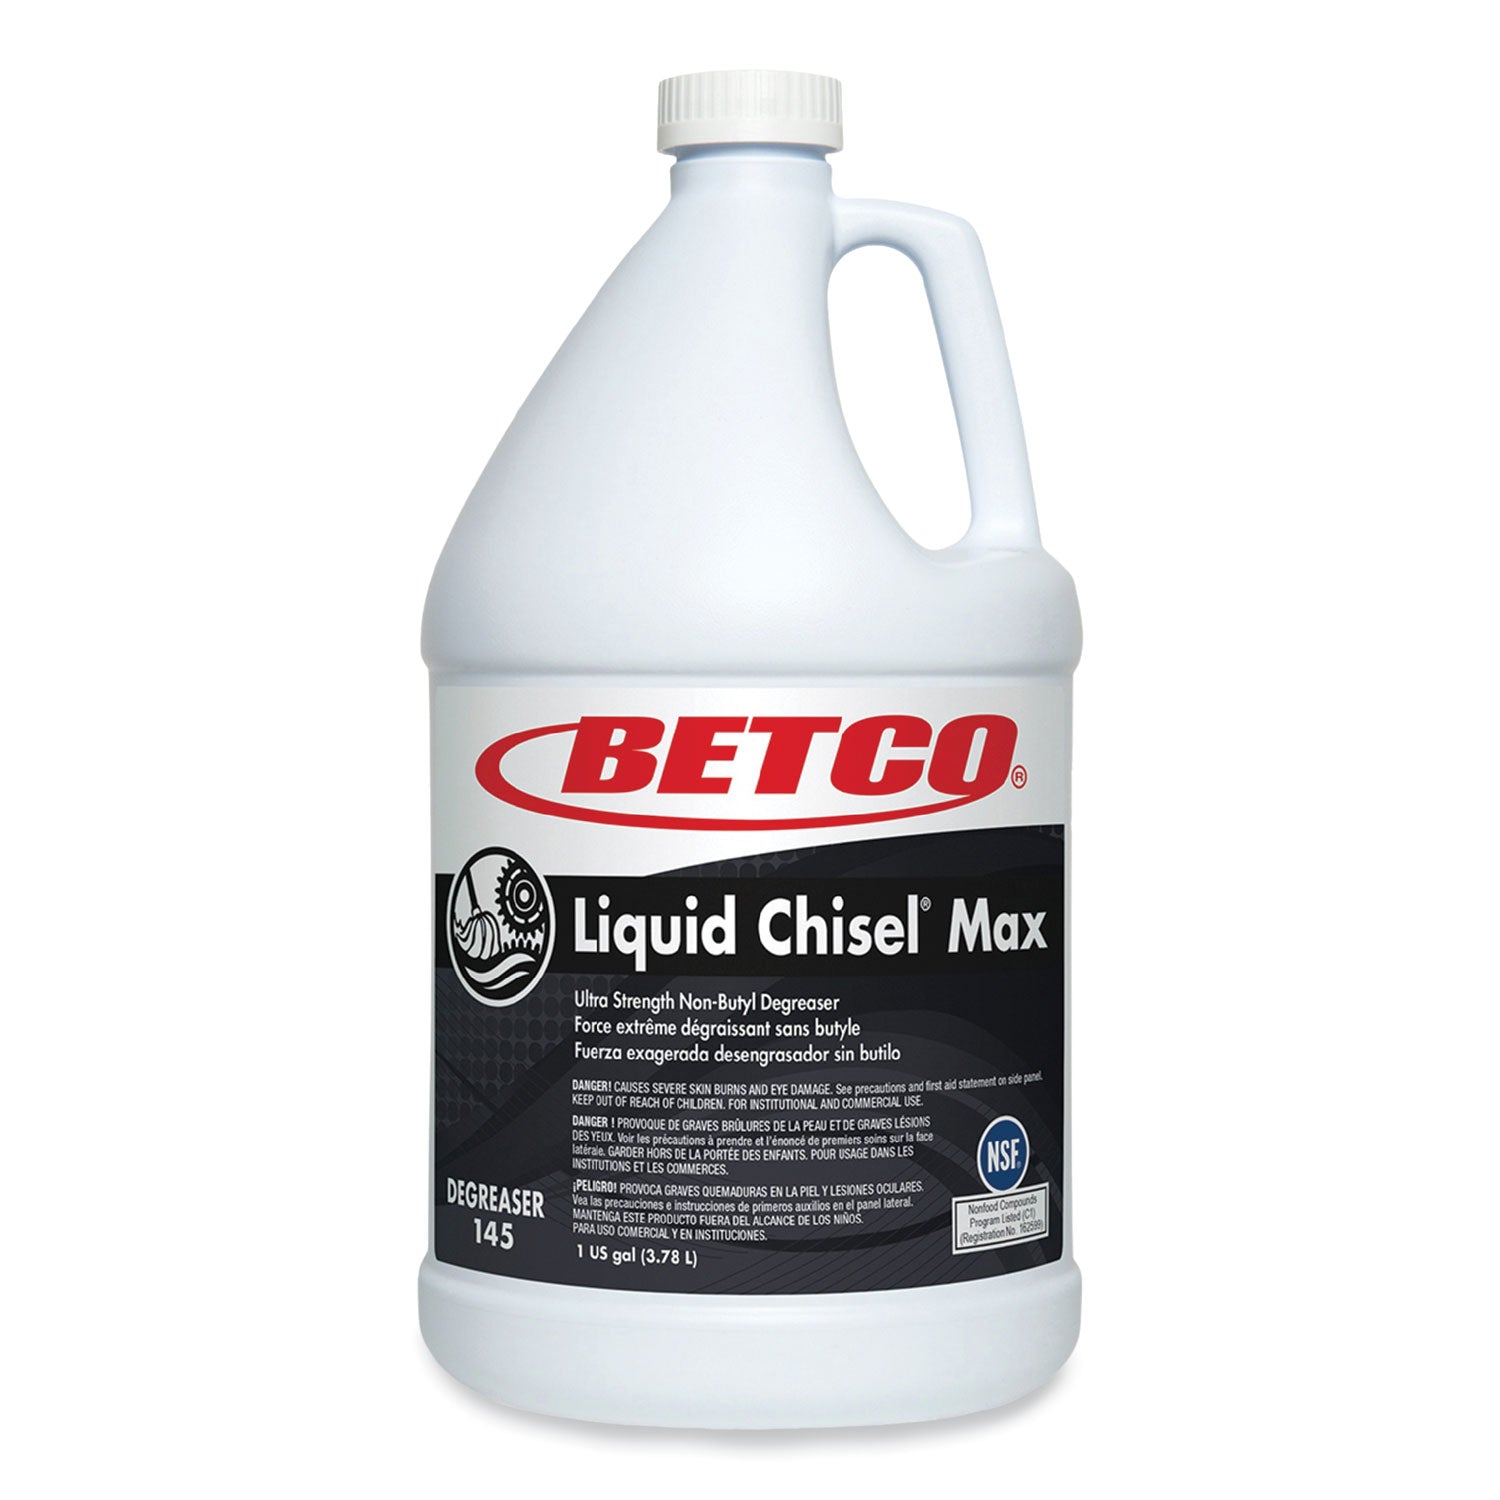 liquid-chisel-max-non-butyl-degreaser-characteristic-scent-1-gal-bottle-4-carton_bet1450400 - 1